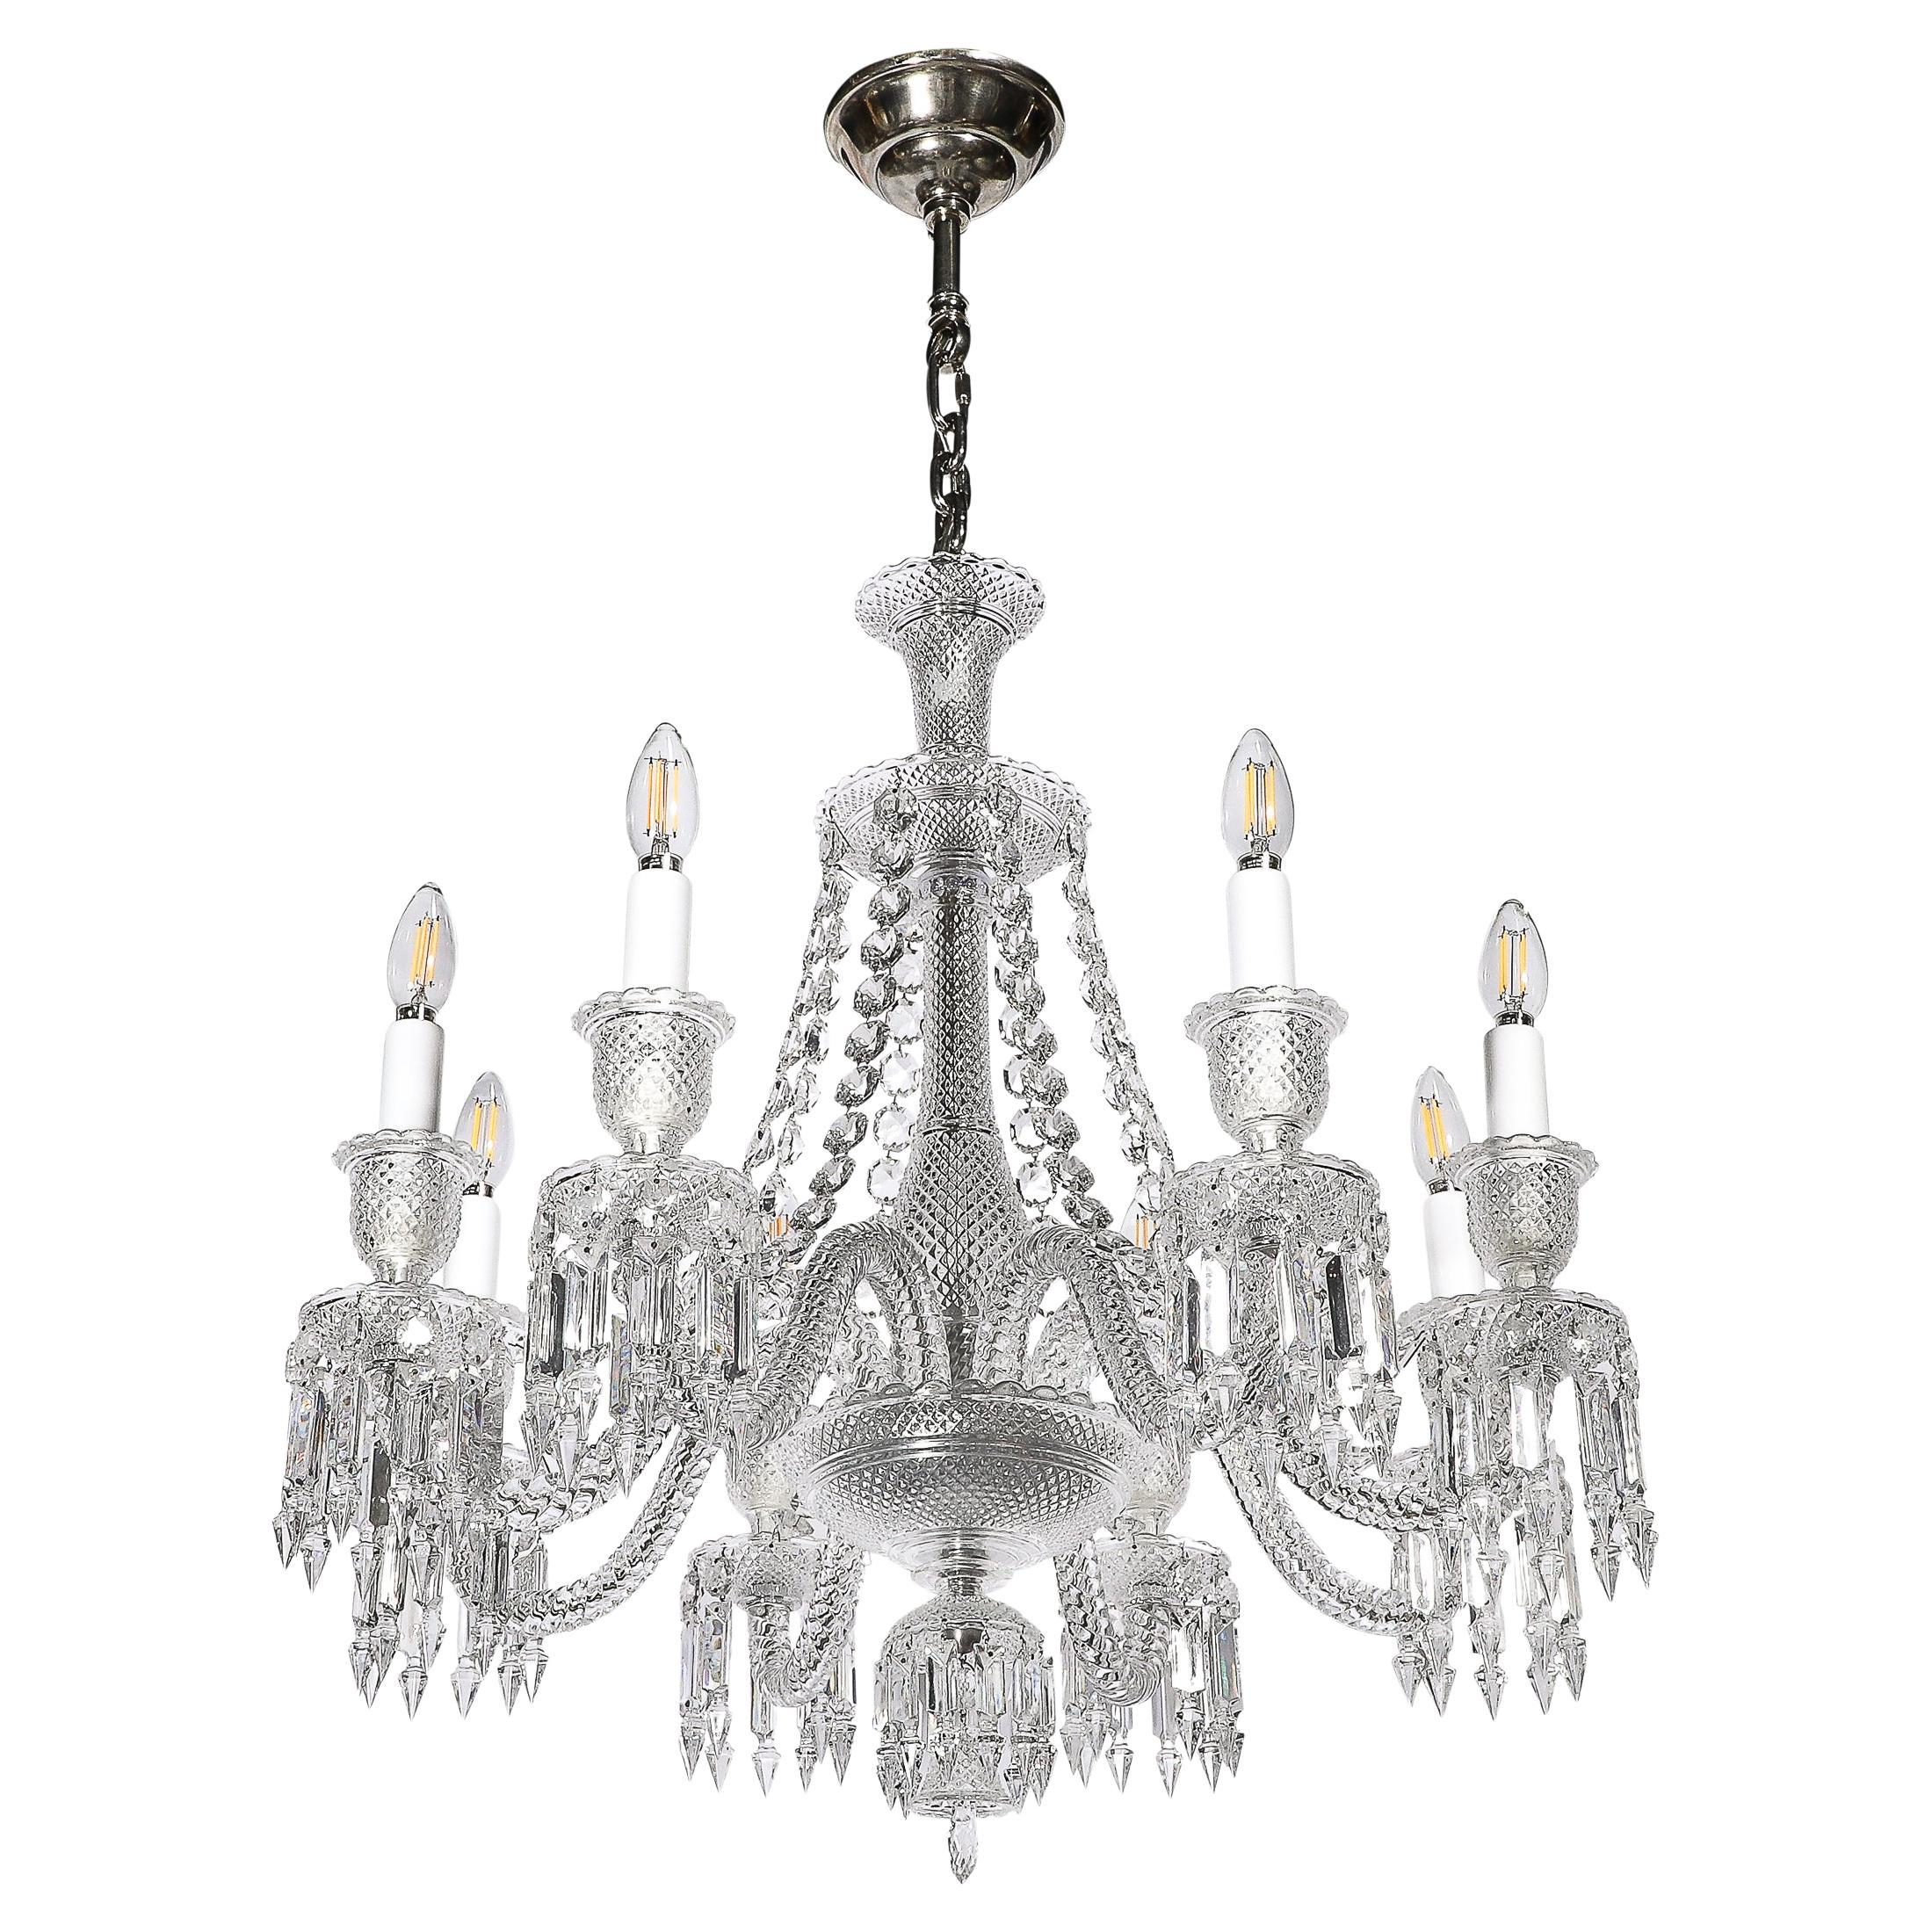 What is a Maria Theresa chandelier?